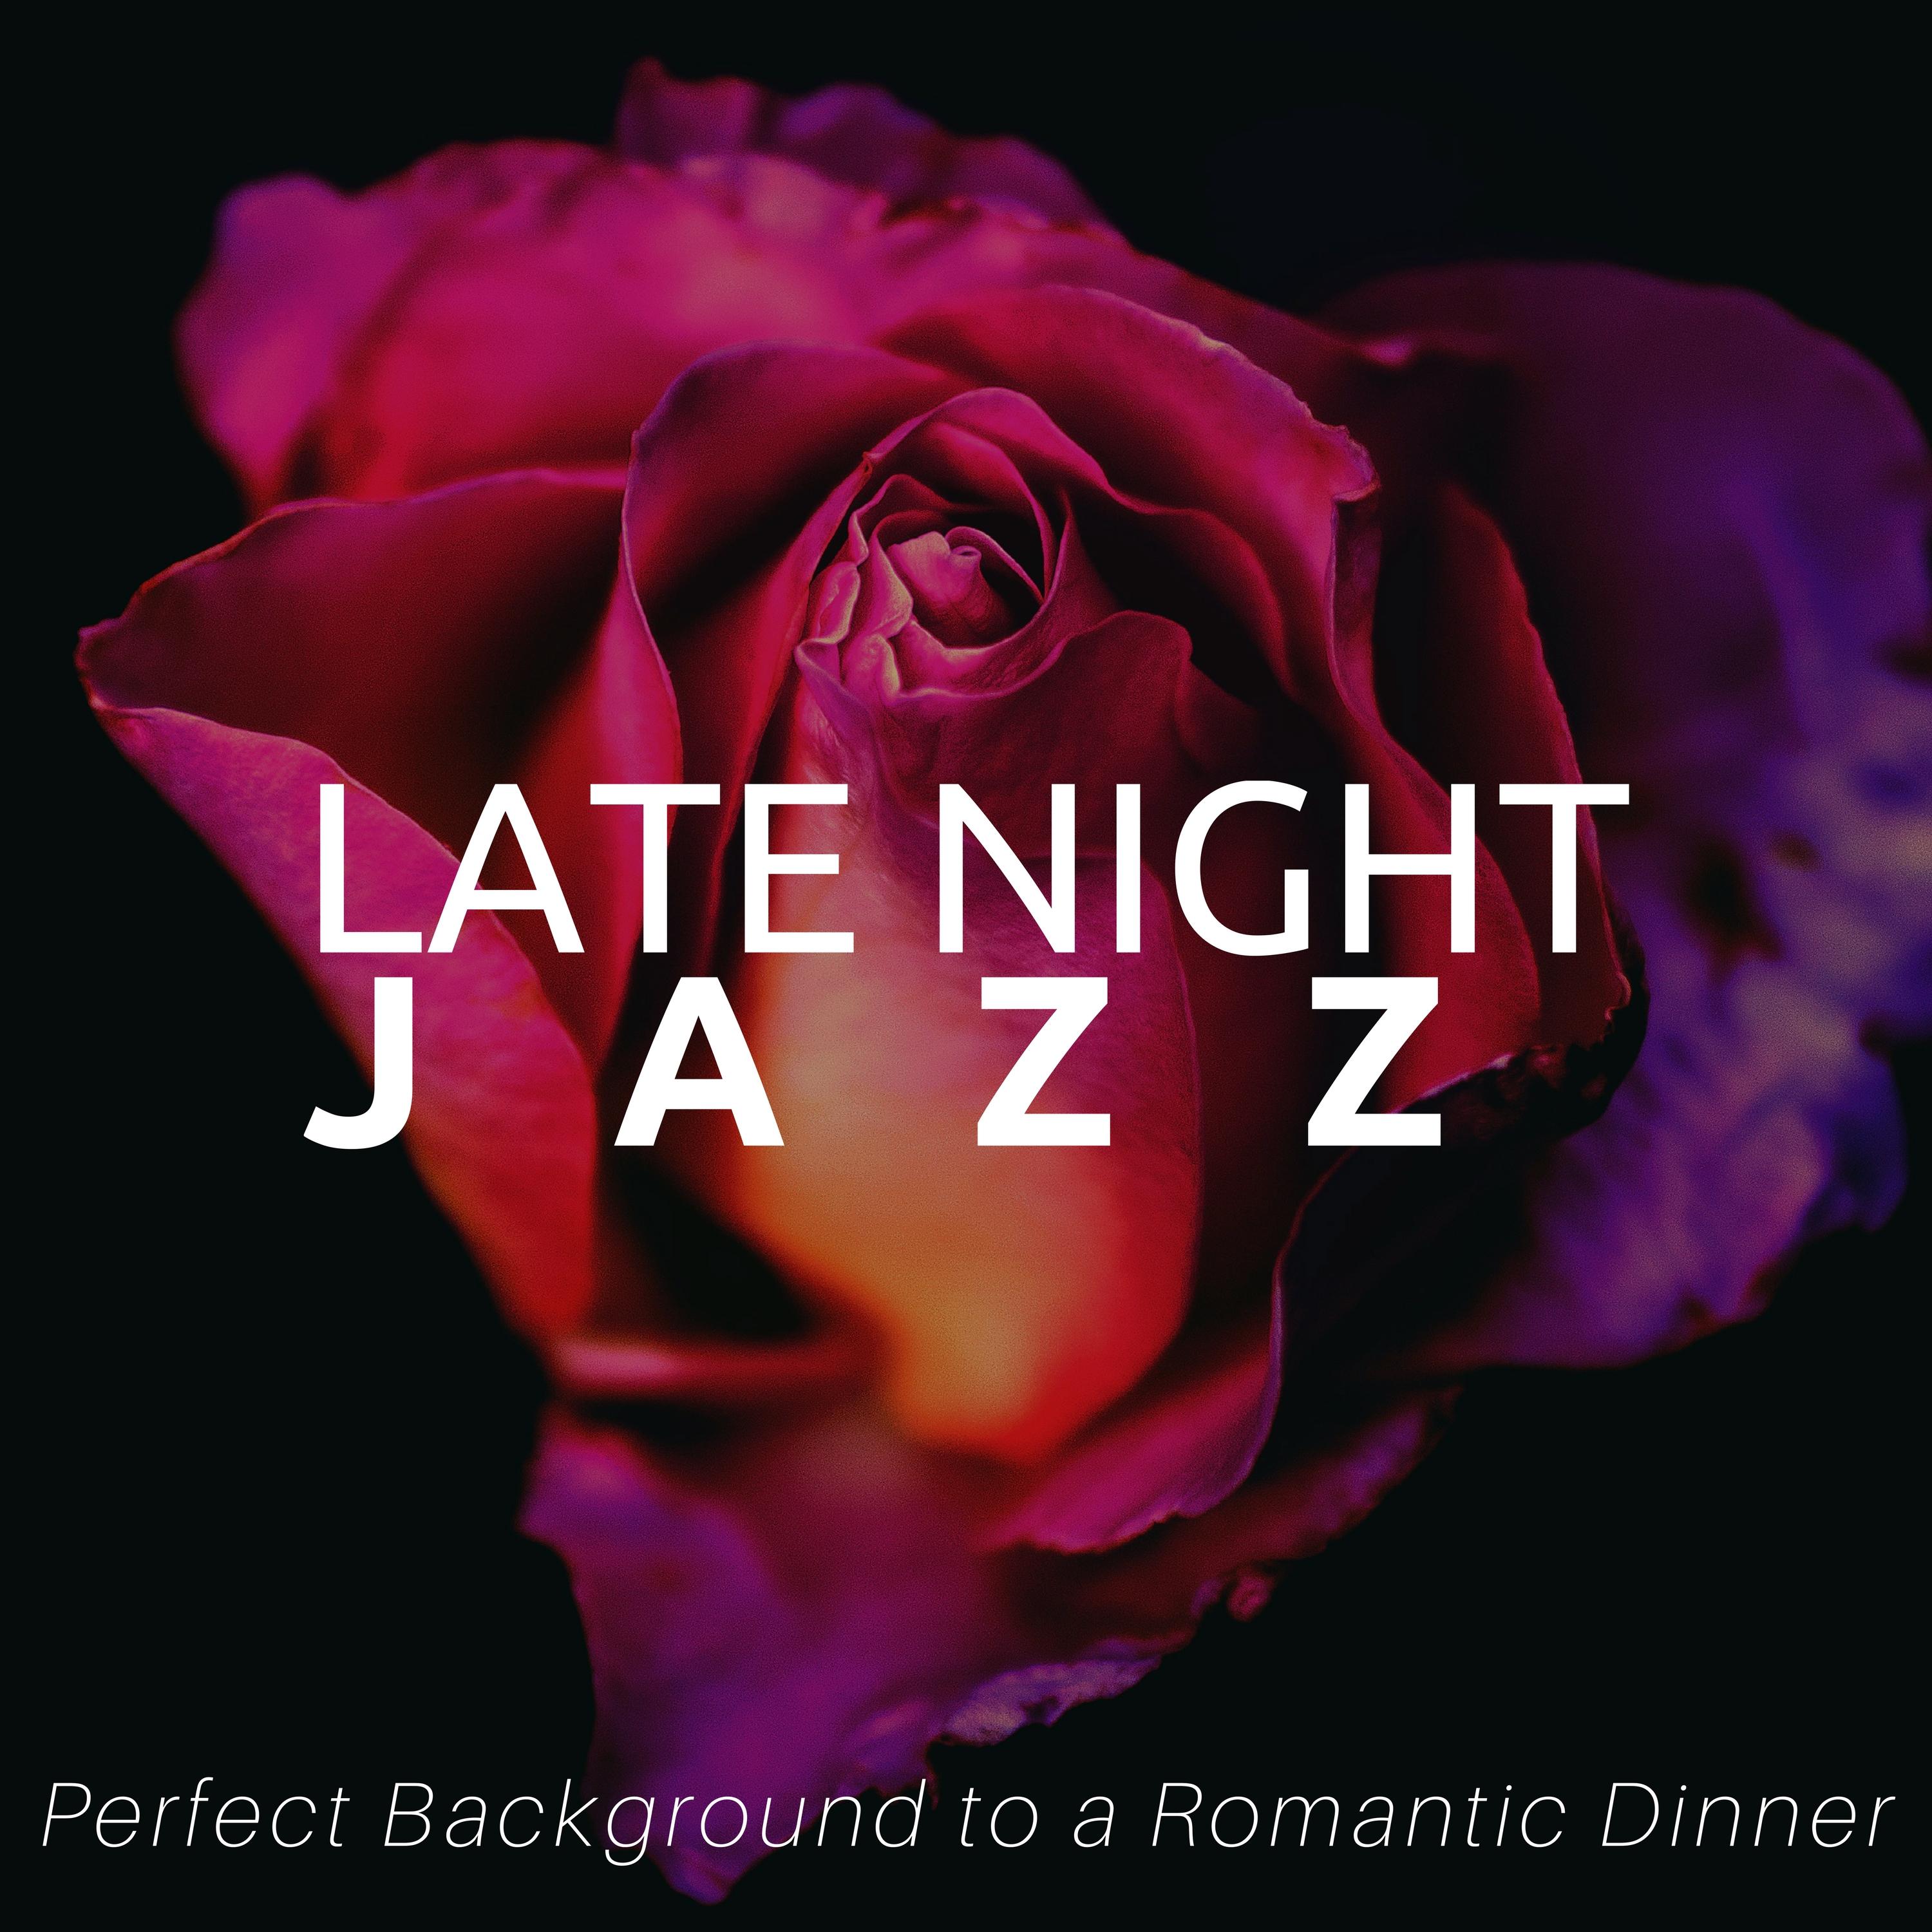 Late Night Jazz - the Perfect Background to a Romantic Dinner, Sensual Night with the Best Chill Instrumental Jazz Vibes, Soulful Jazz